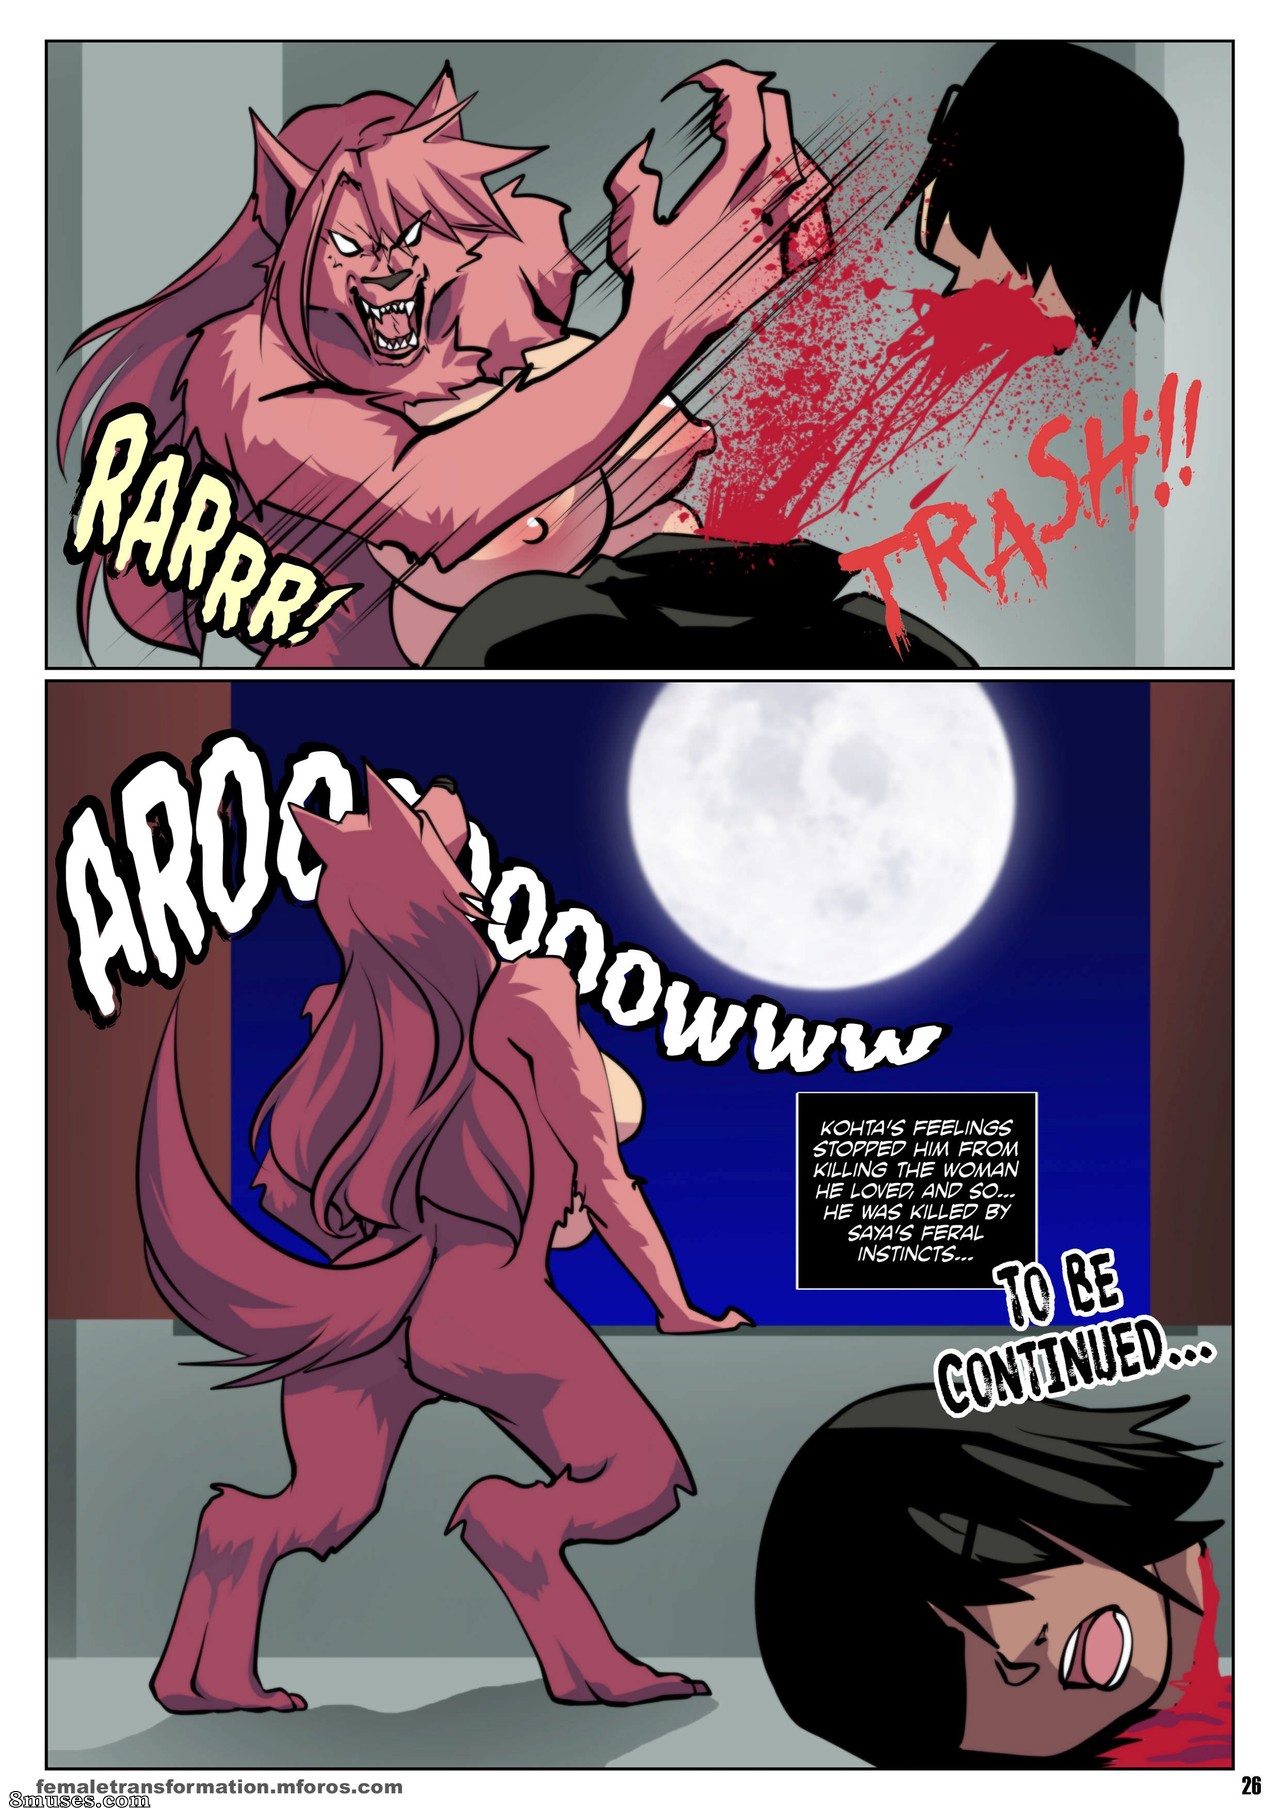 High School of the Werewolf Issue 2 - 8muses Comics - Sex Comics and Porn  Cartoons